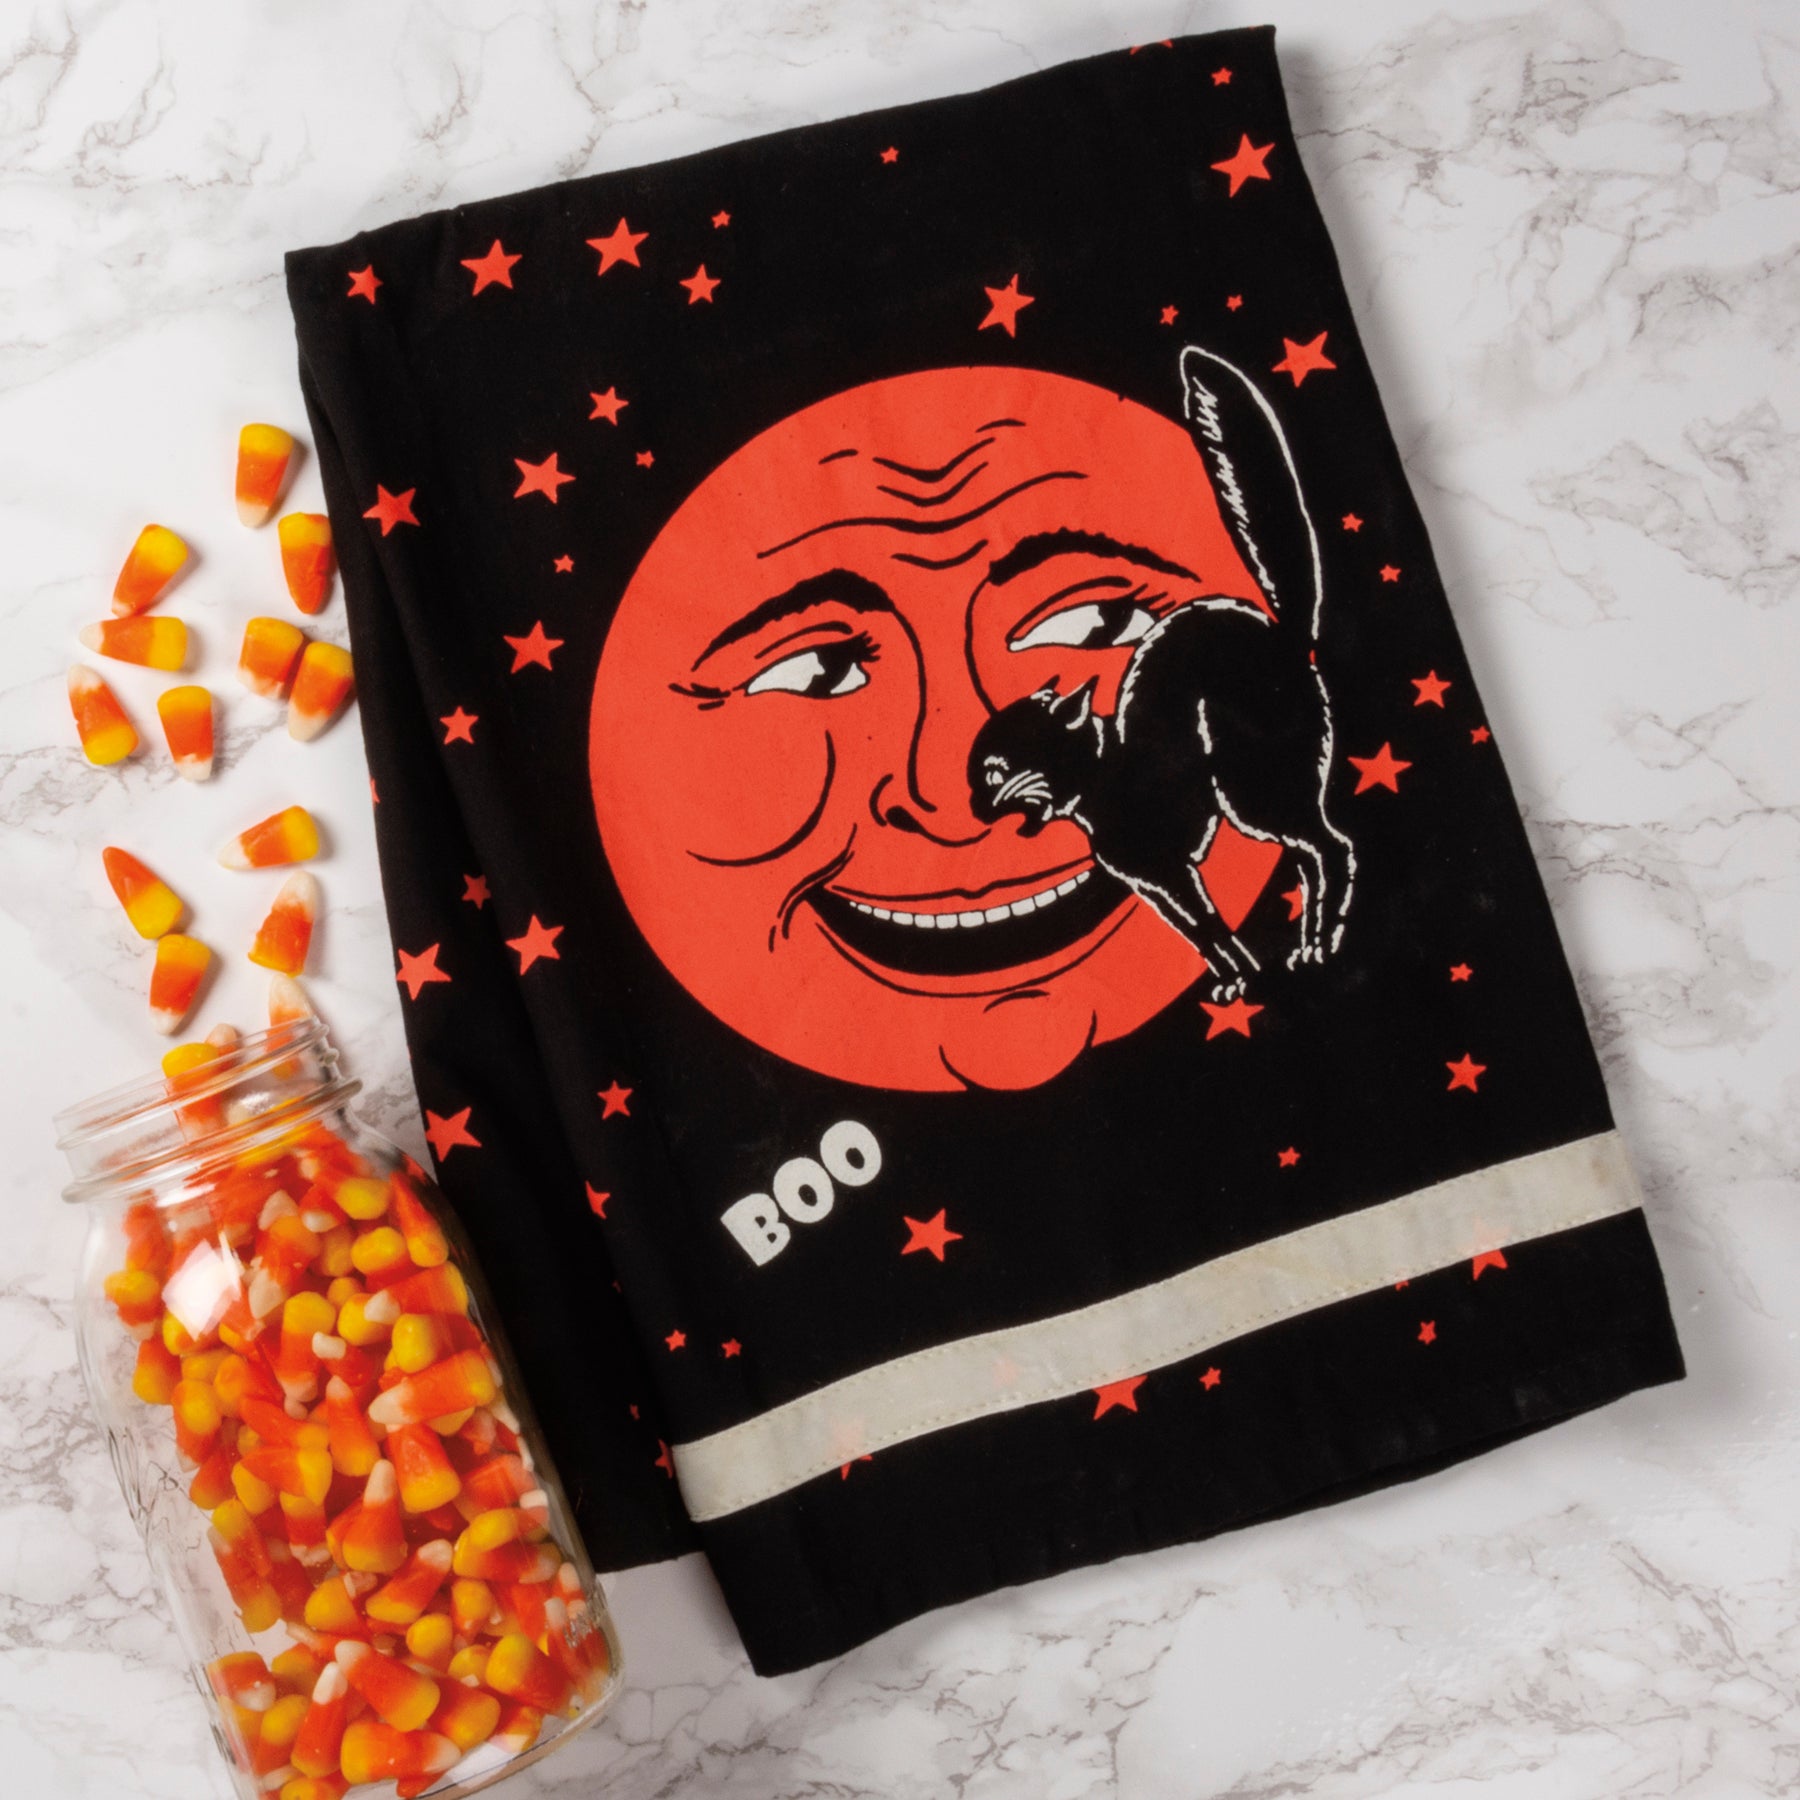 Vintage Styled "Boo" Kitchen Towel